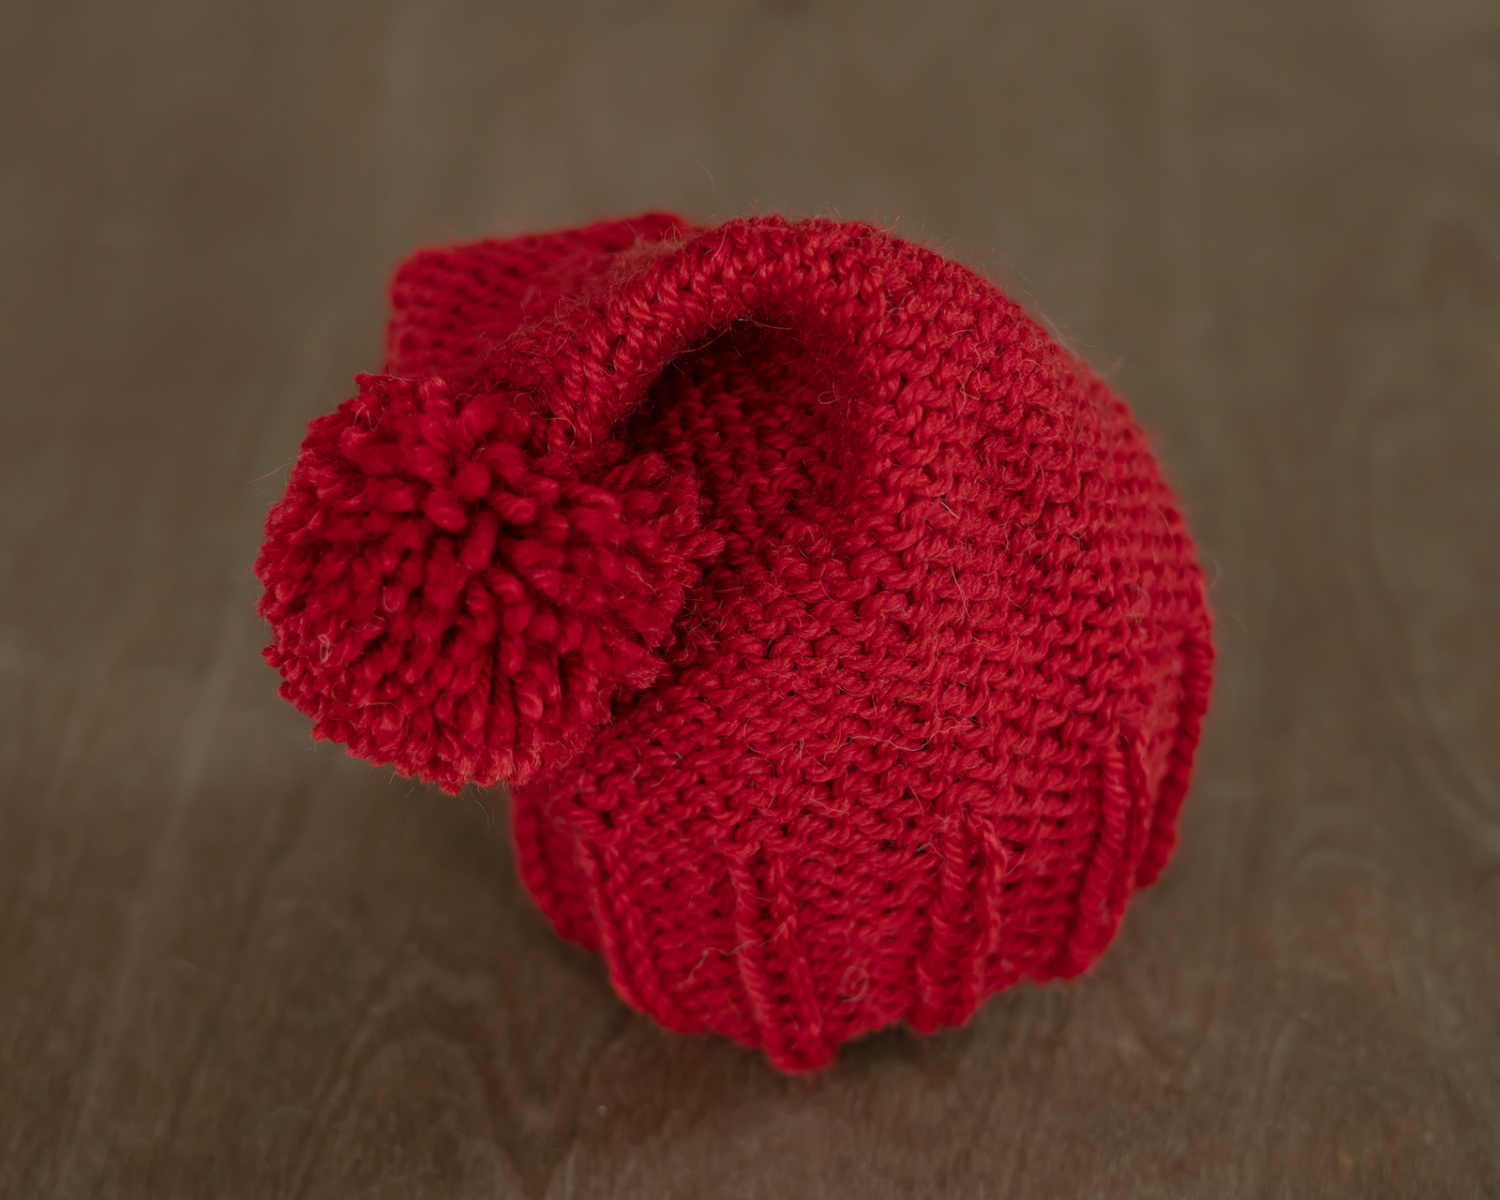 Red Knitted Newborn Hat 0-3 month